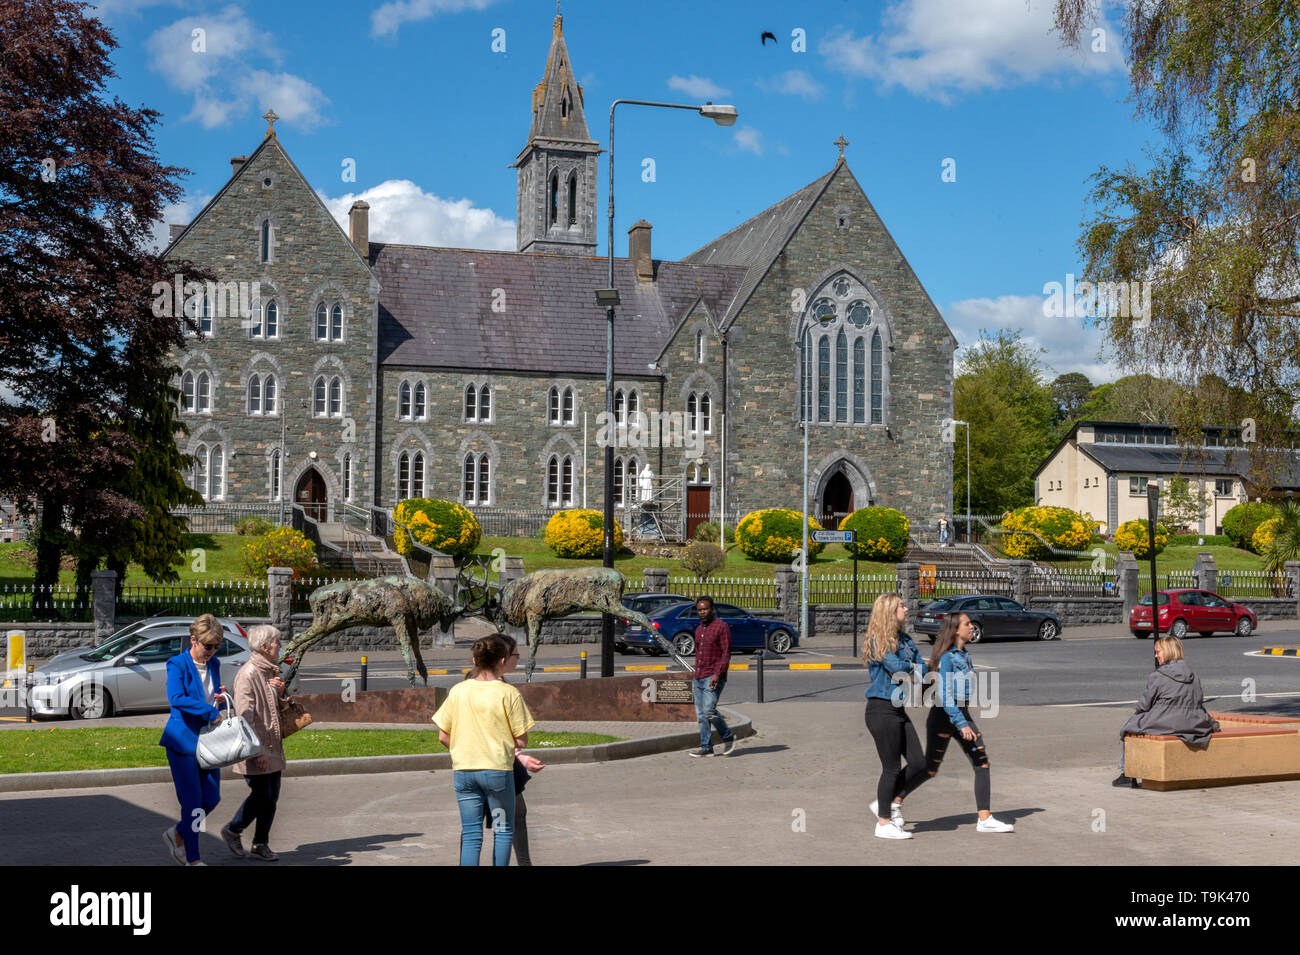 Killarney, people, iconic, sculpture, red deer stags, stags dueling, Church of the Irish Franciscans, Killarney Ireland, tourism, tourists, sunny Stock Photo